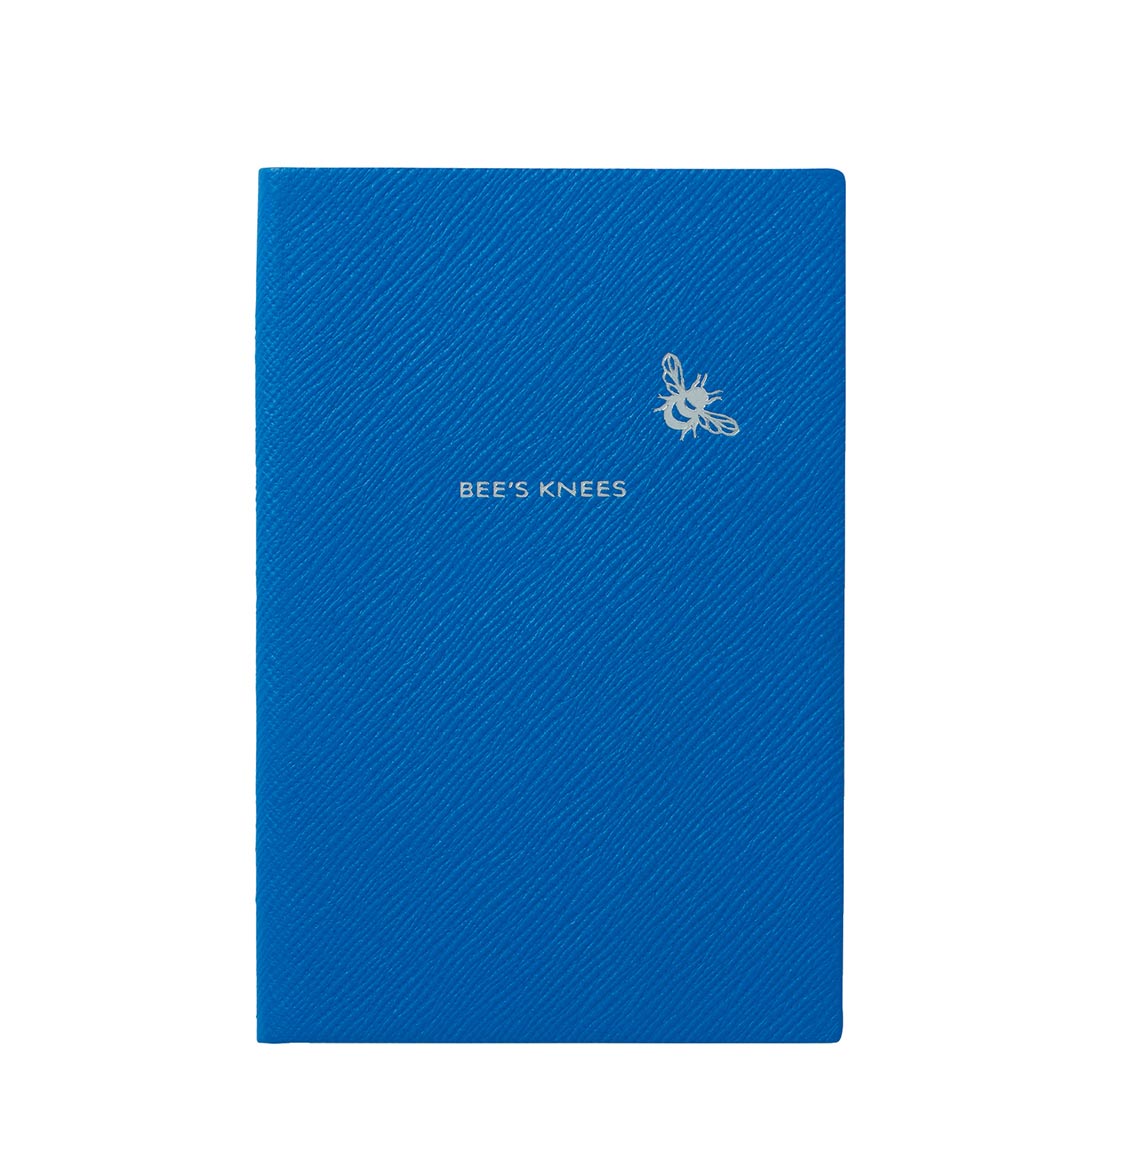 Smythson Bees Knees Notebook